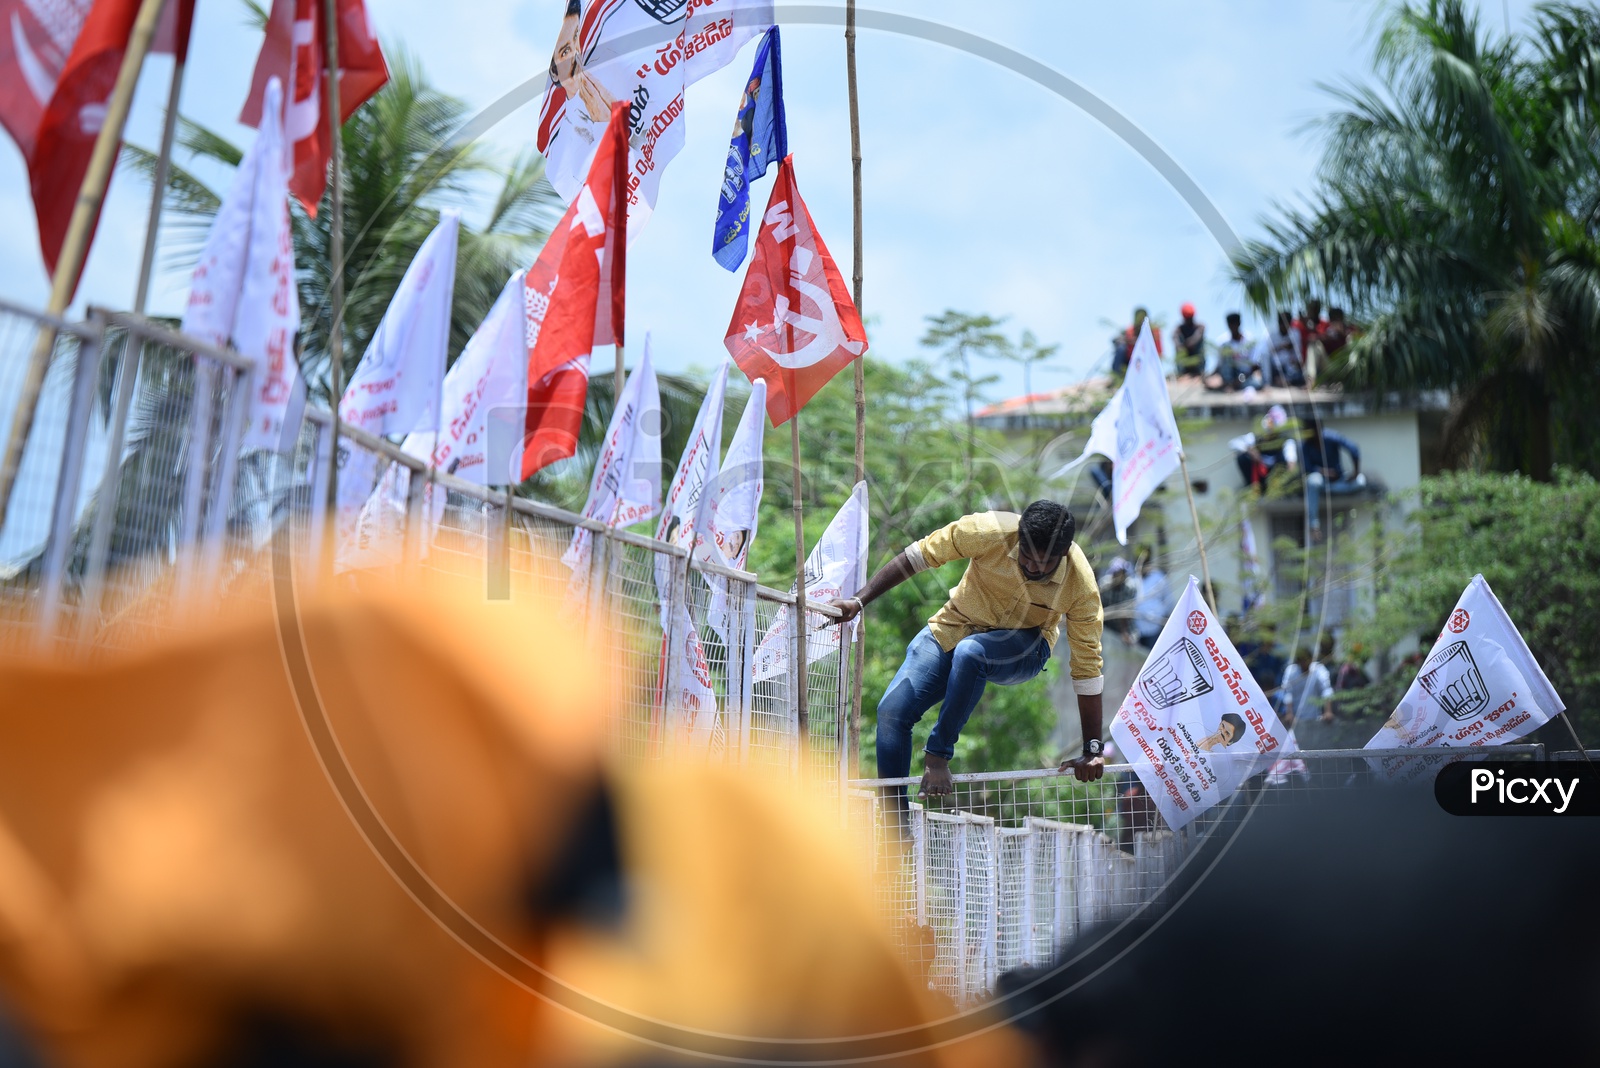 Jana sena party supporter jumping over the barricade at an election campaign in Amalapuram